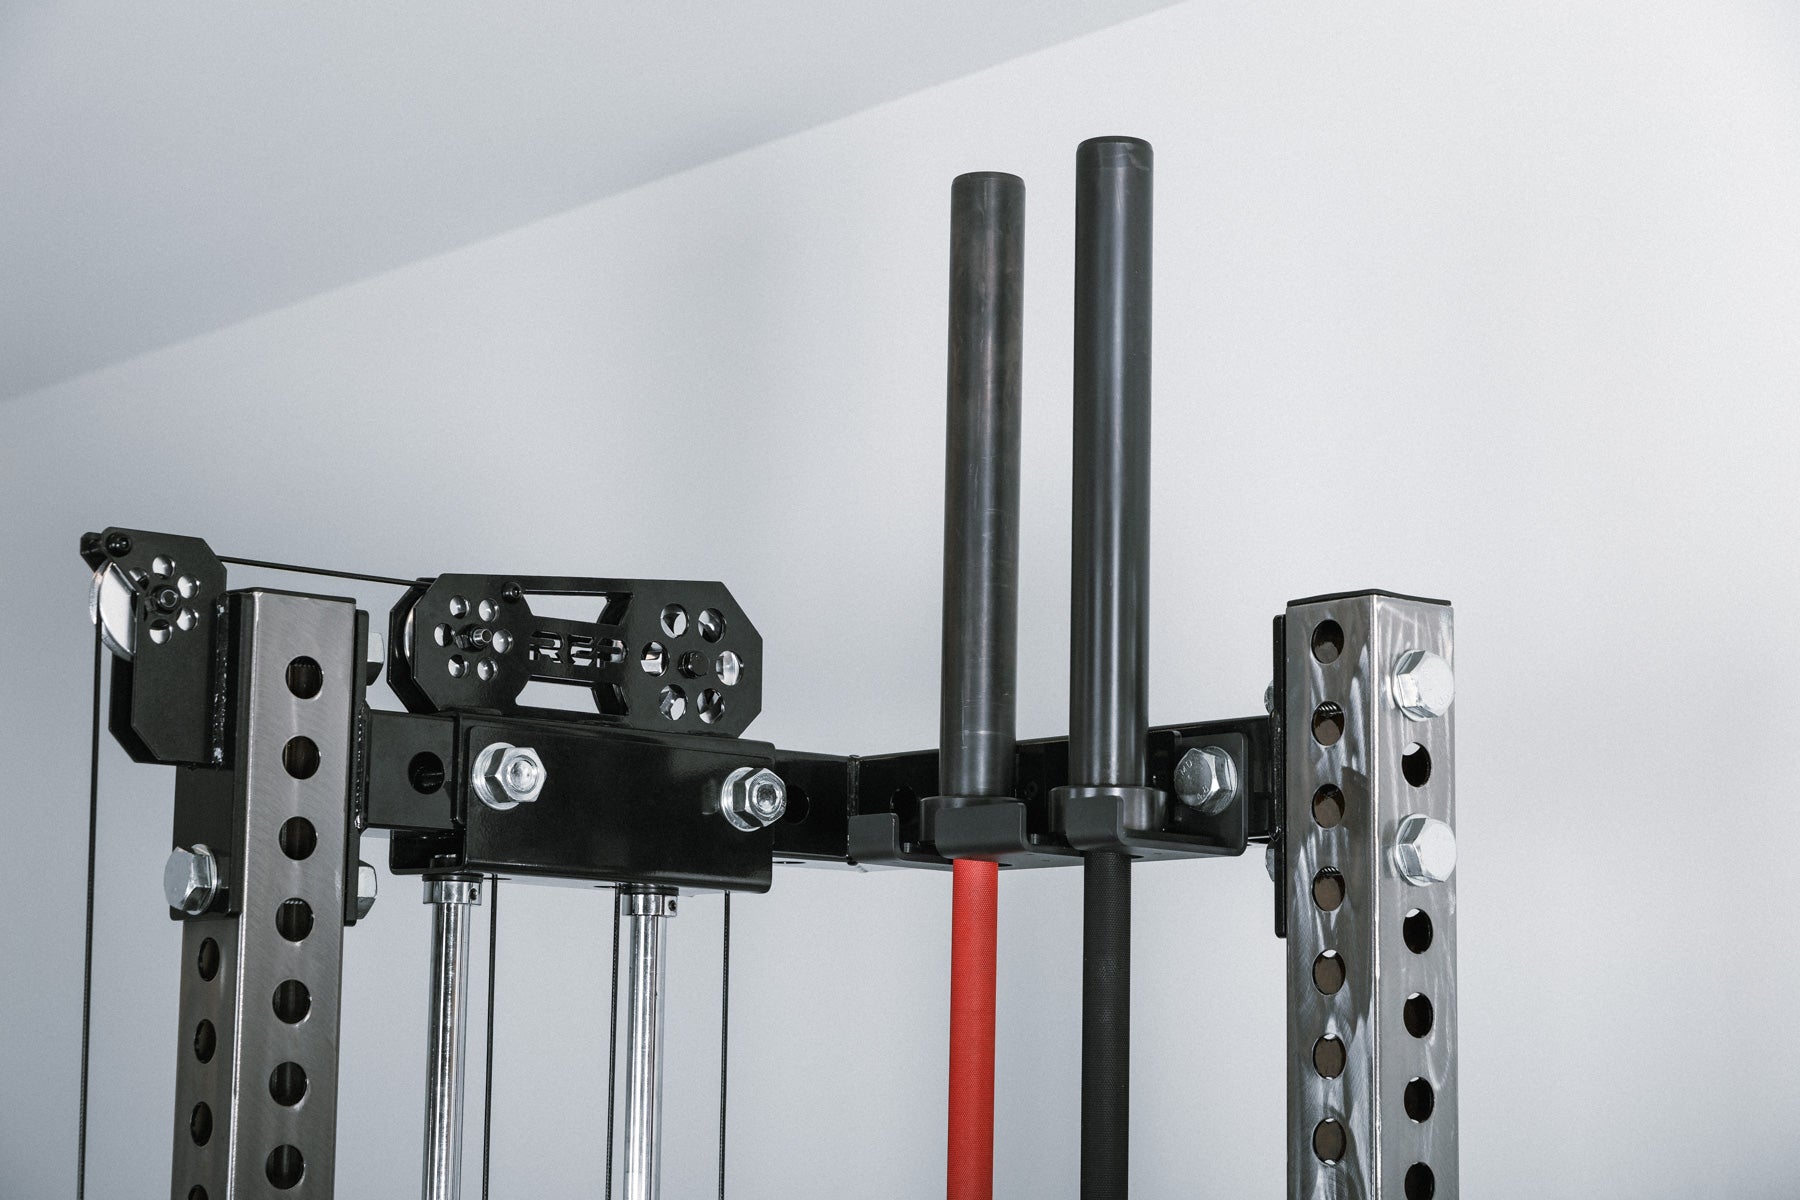 Functional Trainer With Storage - Showing Cables and Pulleys and attachment compatibility on the L-Shaped Crossmember